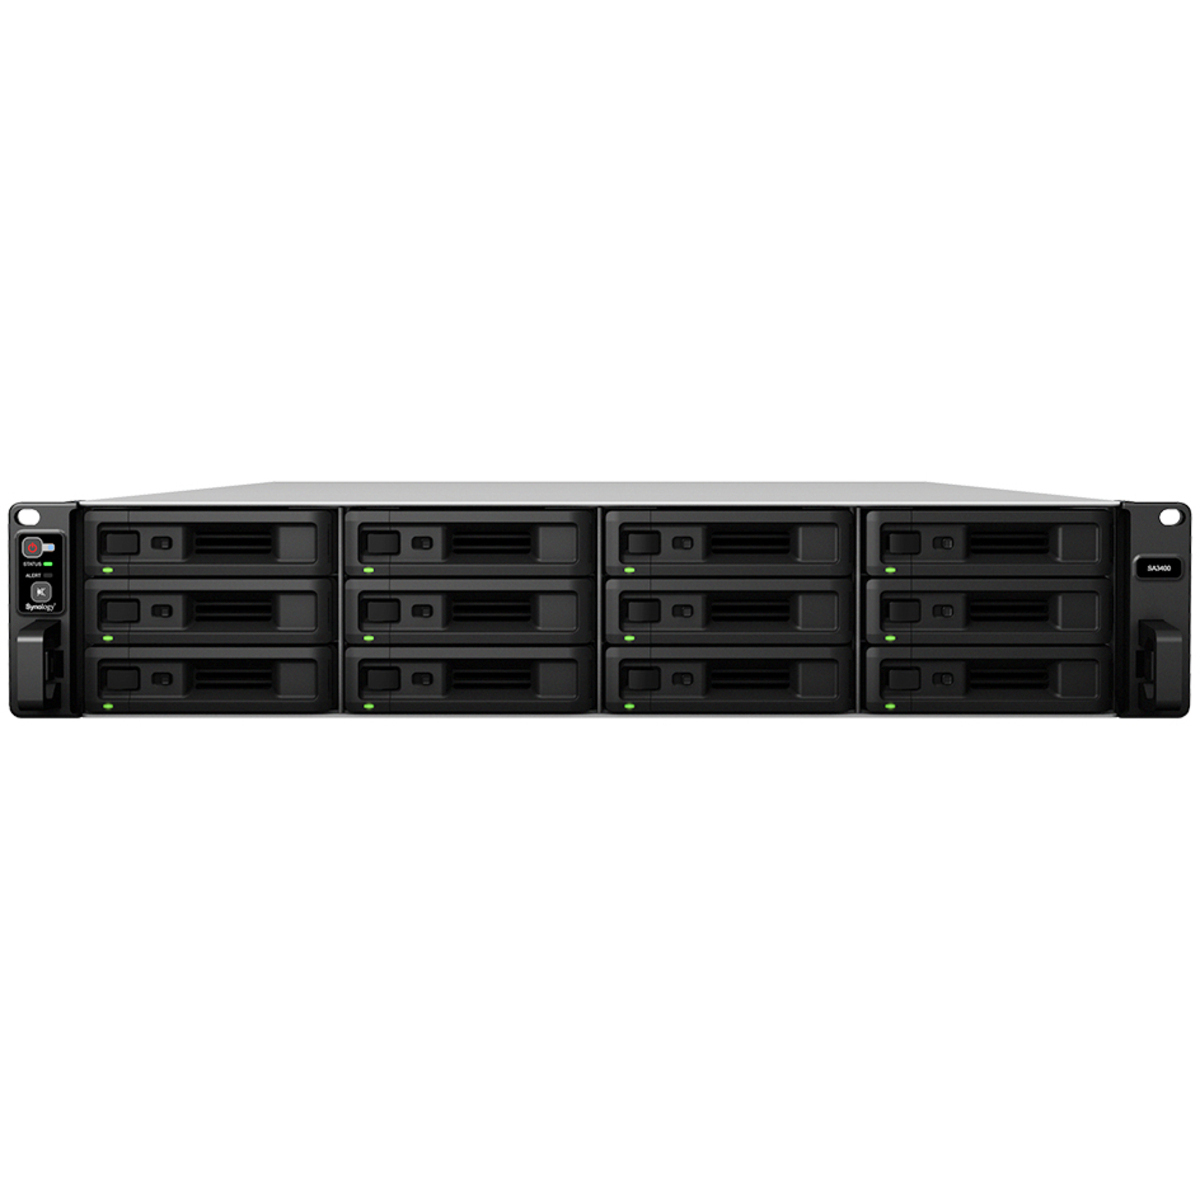 buy $9712 Synology RackStation SA3400 96tb RackMount NAS - Network Attached Storage Device 12x8000gb Seagate BarraCuda ST8000DM004 3.5 5400rpm SATA 6Gb/s HDD CONSUMER Class Drives Installed - Burn-In Tested - nas headquarters buy network attached storage server device das new raid-5 free shipping usa christmas new year holiday sale RackStation SA3400